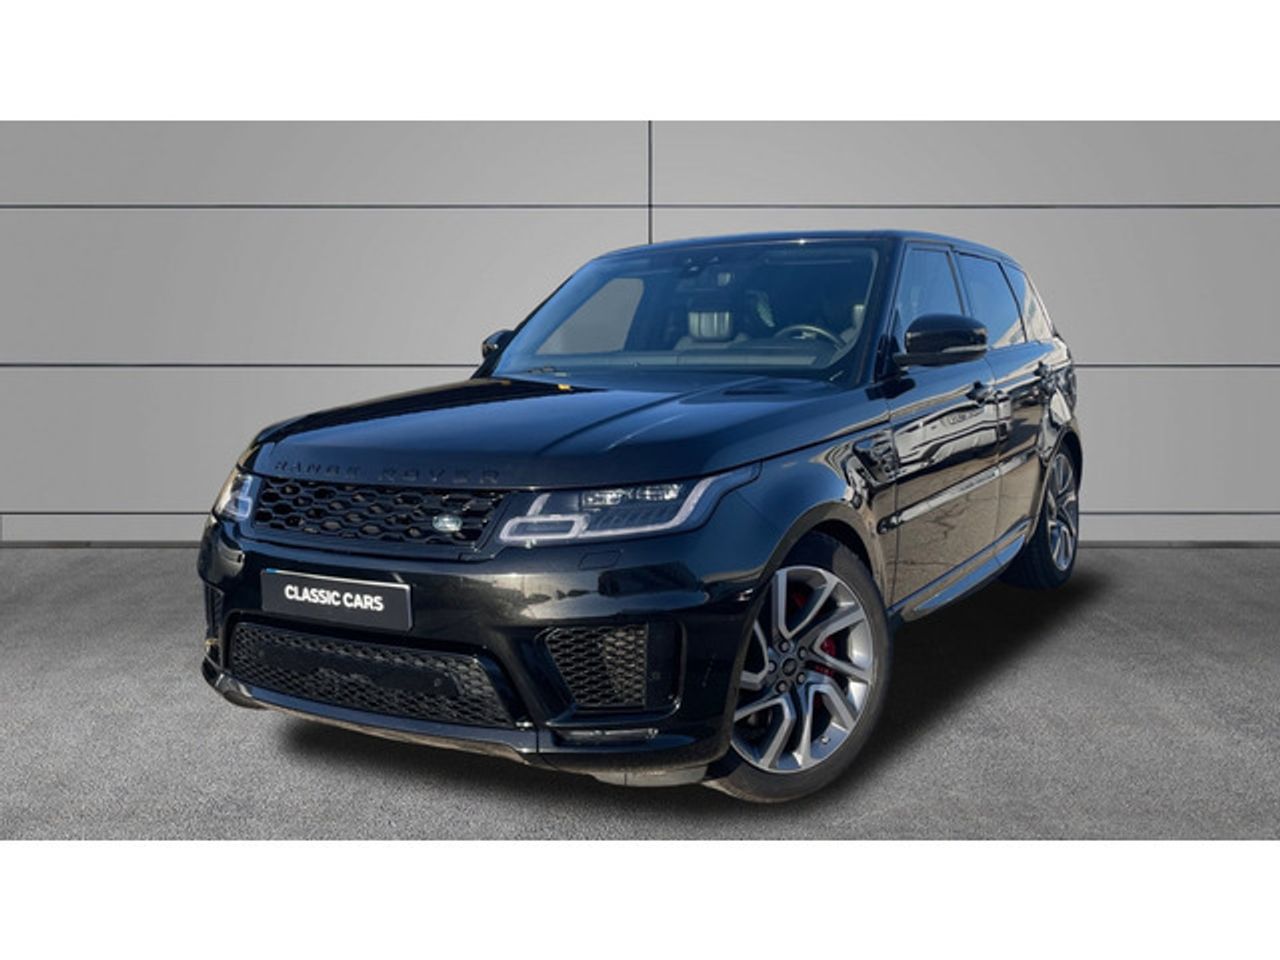 Land-rover range rover sport 5.0 v8 supercharged autobiography dynamic 386 kw (525 cv)